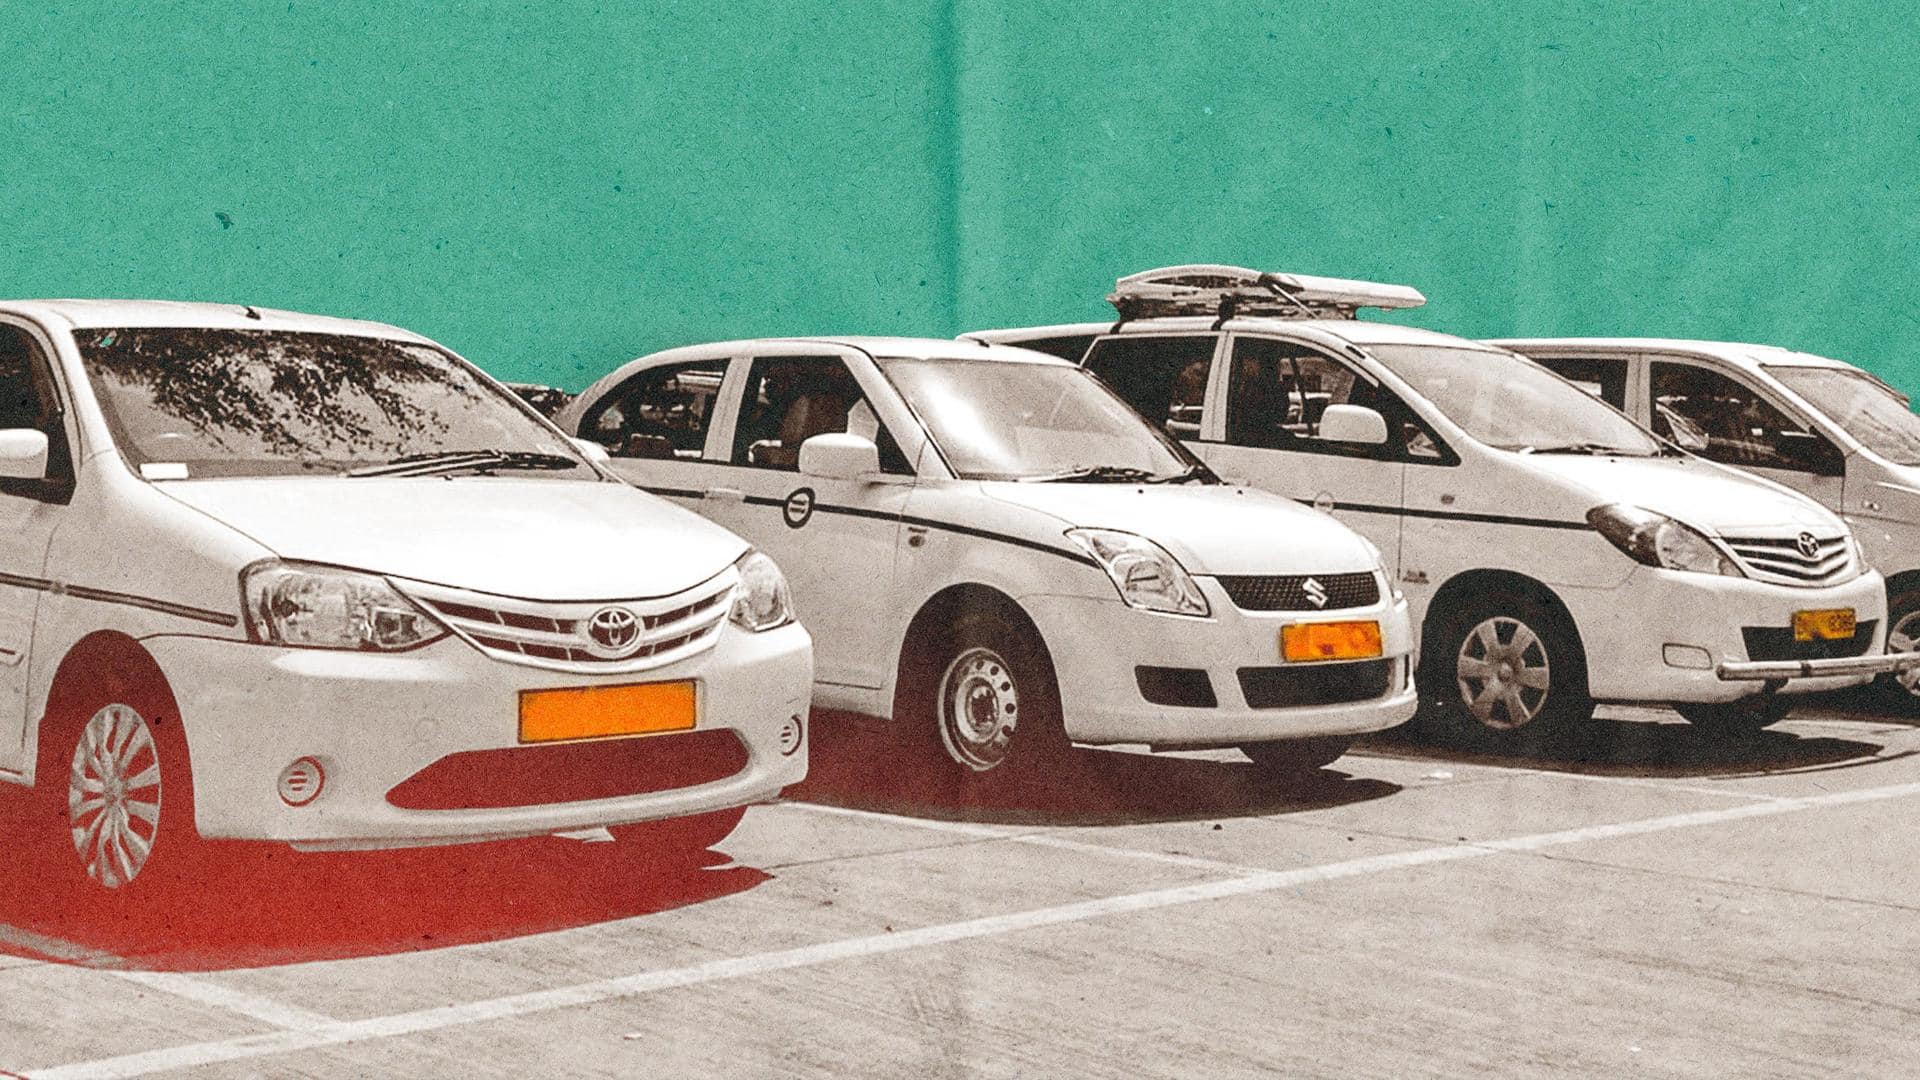 Maharashtra bans car-pooling in non-transport vehicles over security concerns